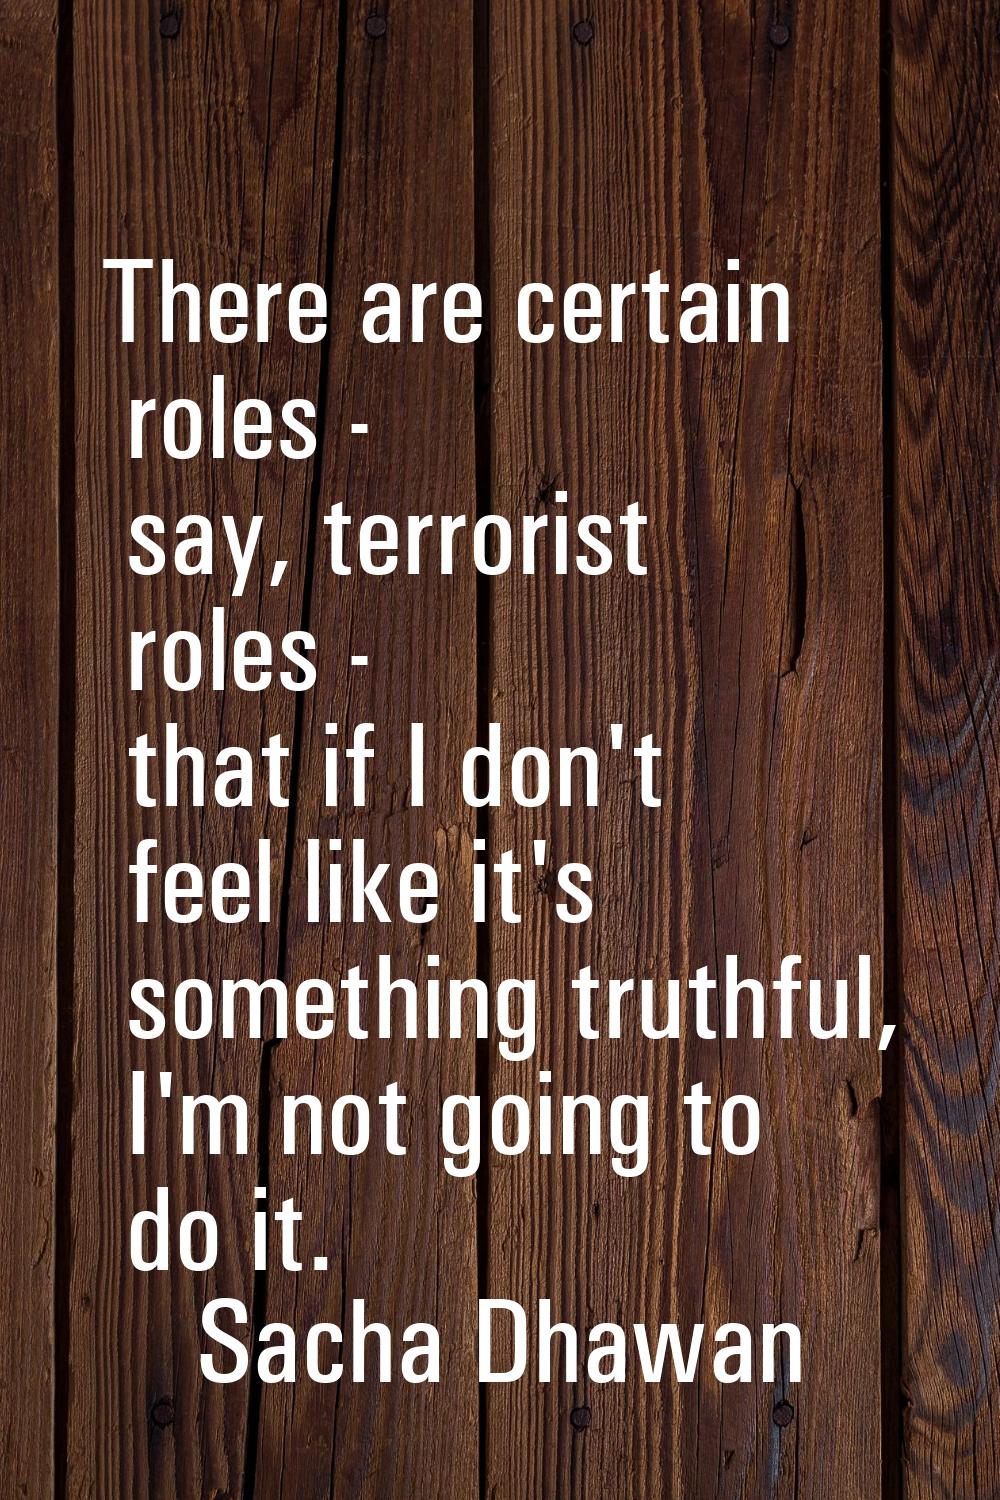 There are certain roles - say, terrorist roles - that if I don't feel like it's something truthful,